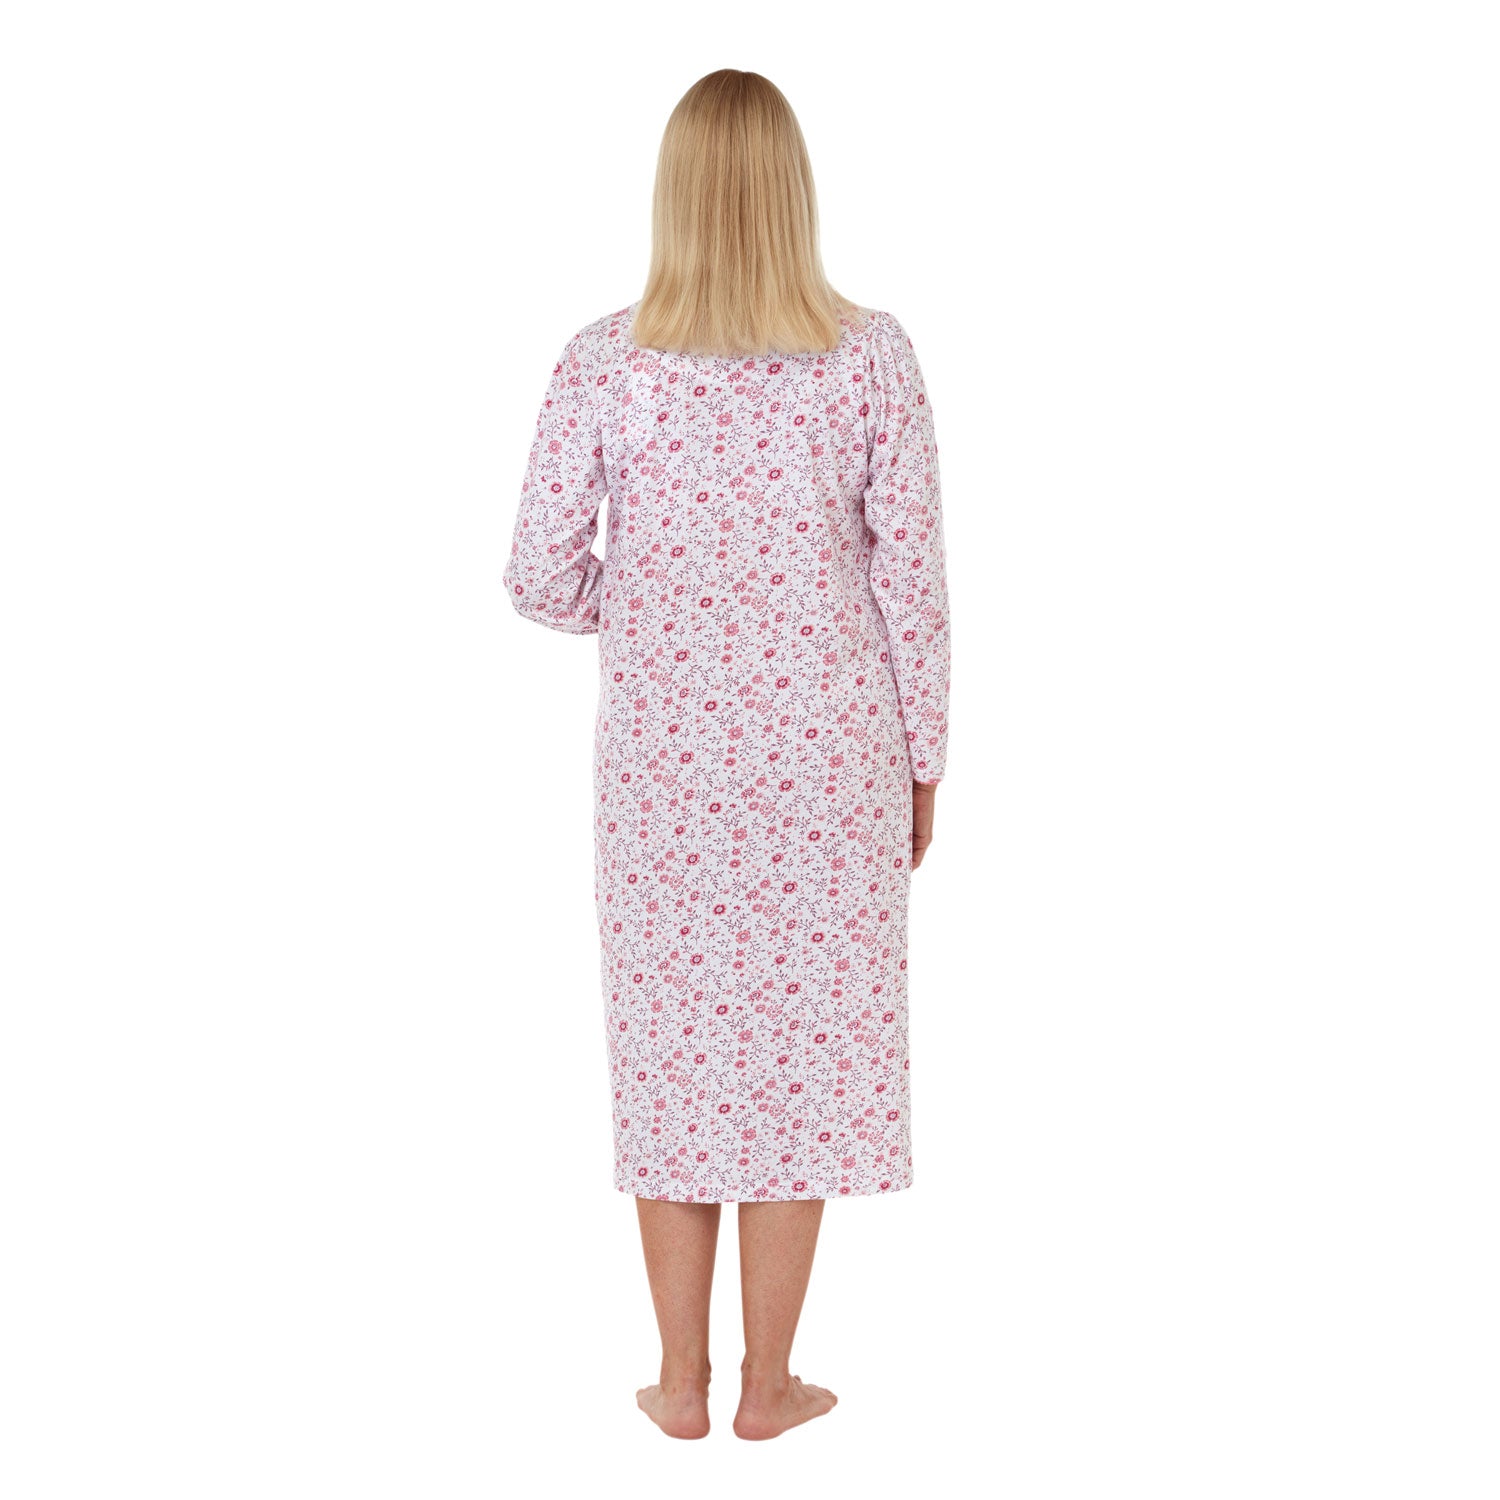 Marlon Danielle Floral Print 100% Cotton Jersey Long Sleeve Nightdress - Rose 2 Shaws Department Stores